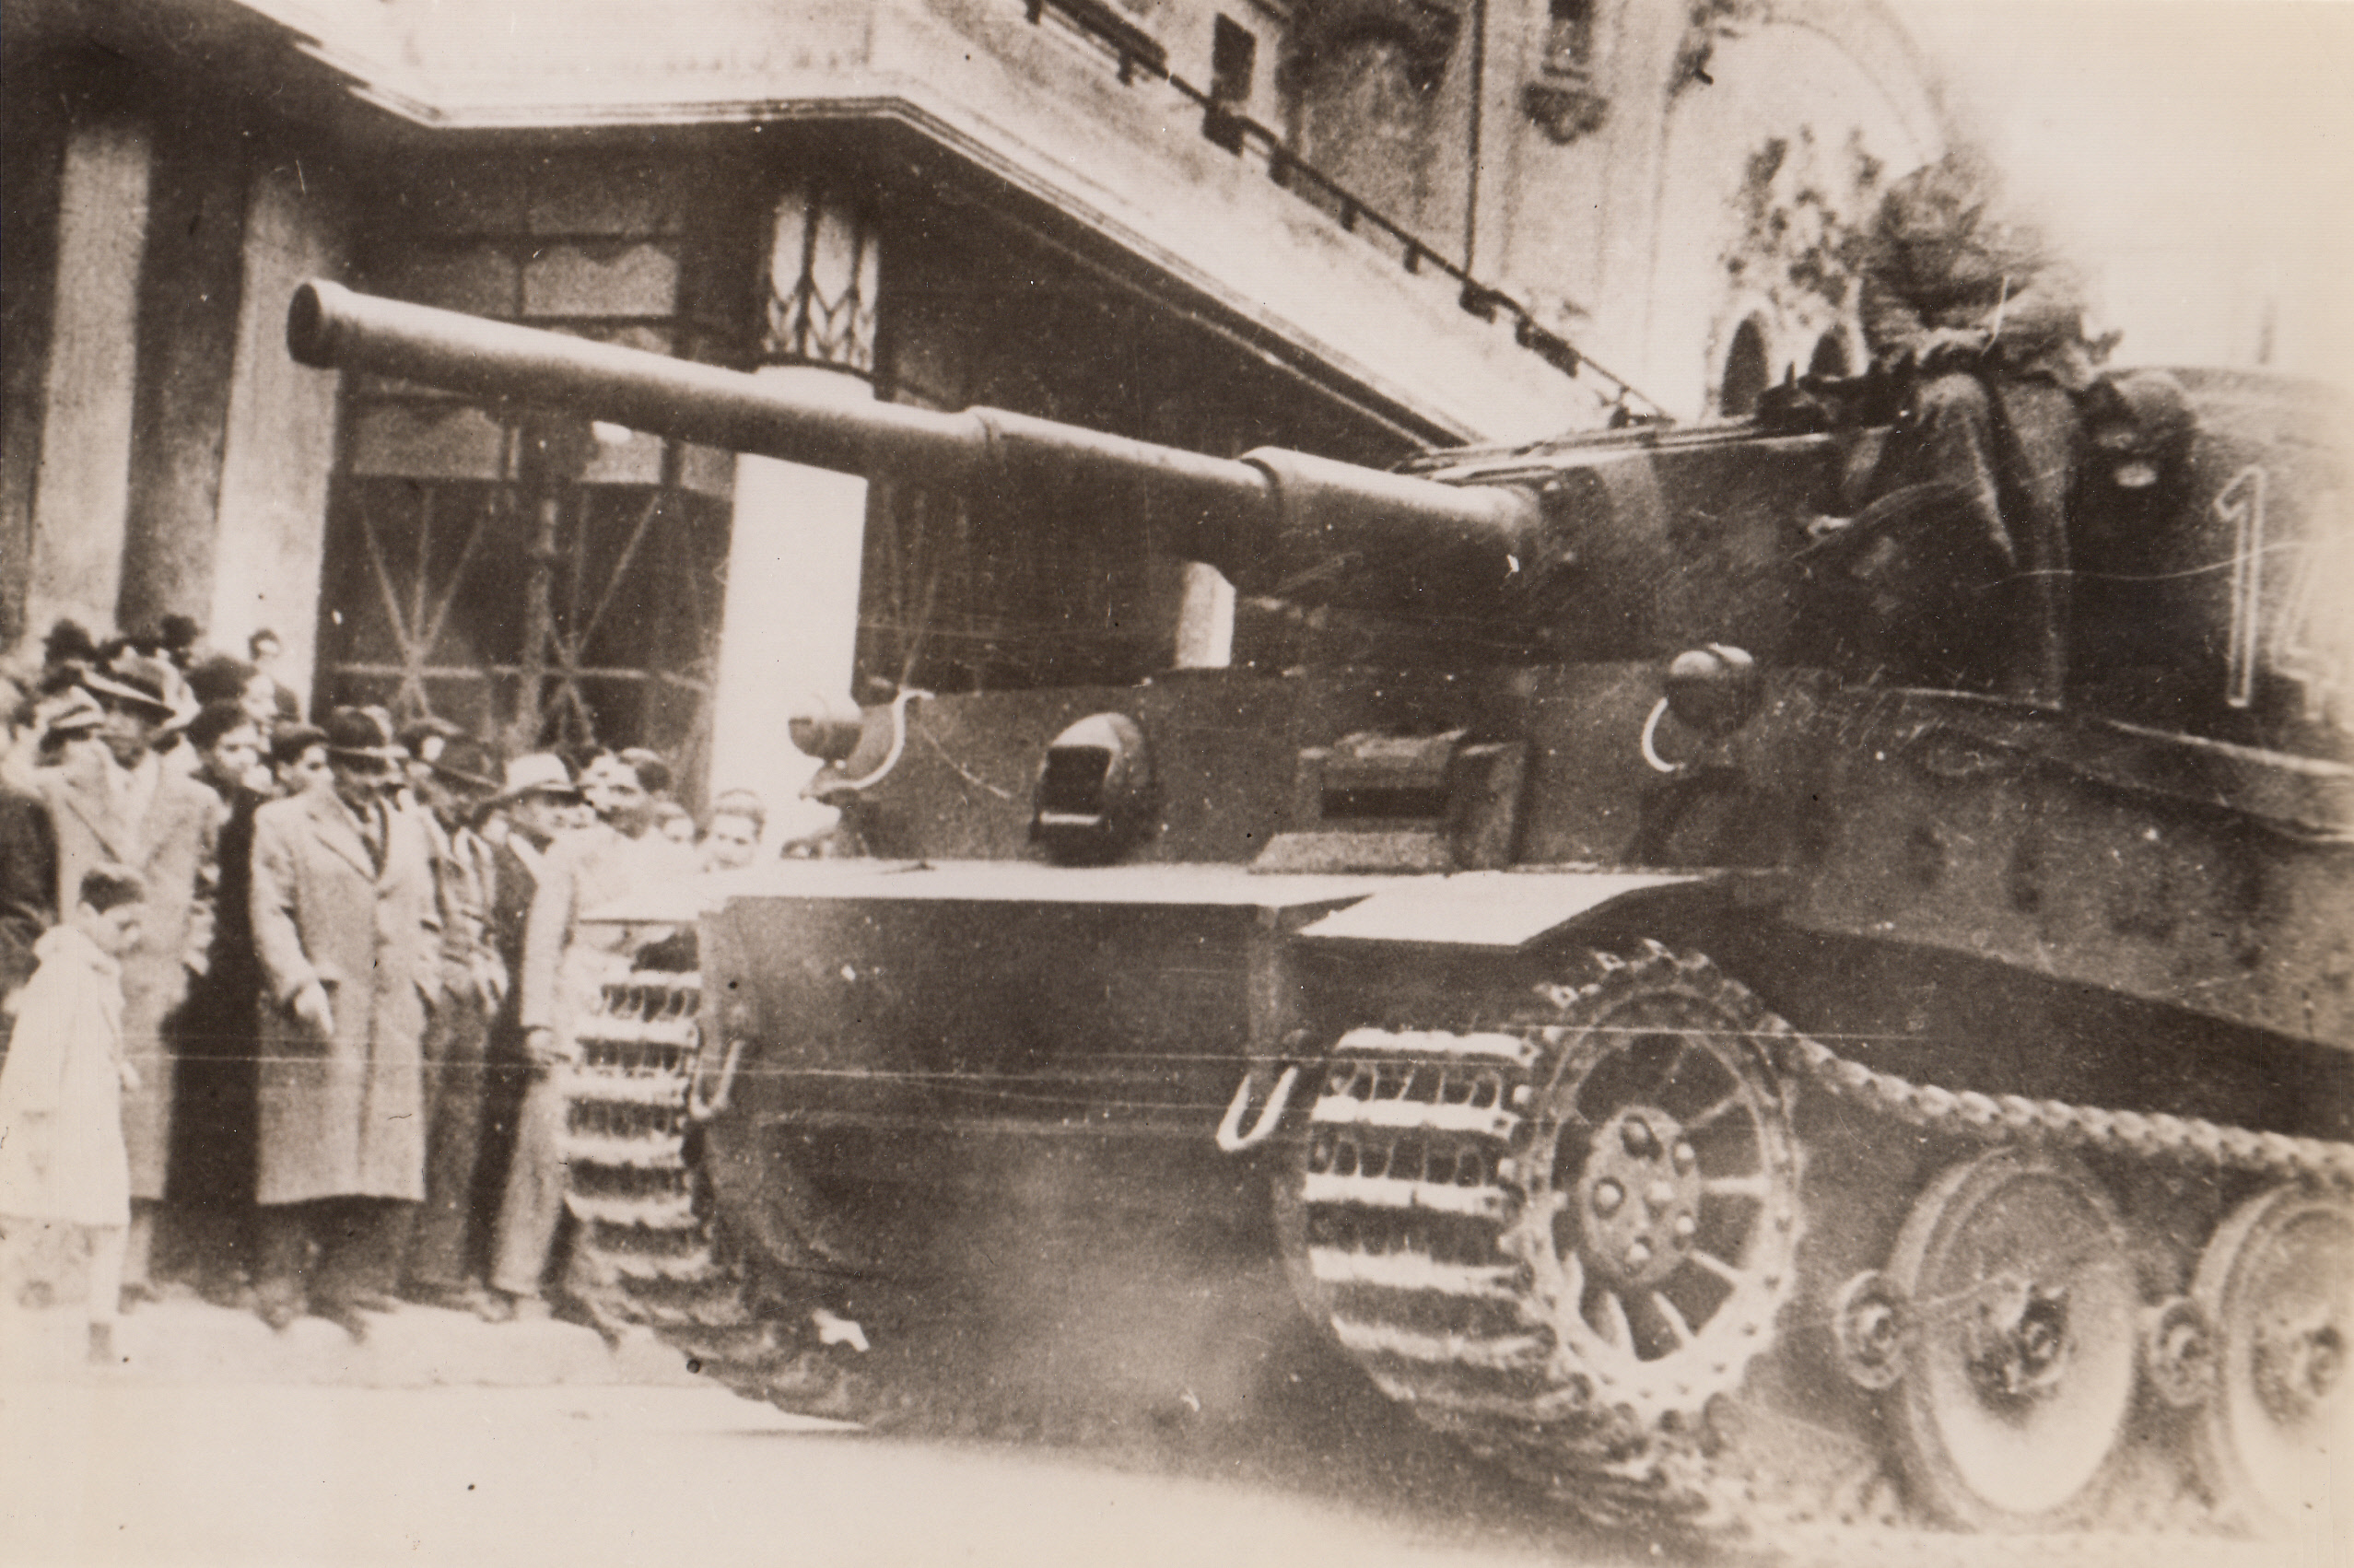 Nazi Tank in Tunis, 1/10/1943. Tunis, Tunisia – Photo, obtained through neutral sources in Portugal, shows a heavy German tank rolling through the streets of Tunis.  Latest reports show the Tunisian front indicate that French forces have repulsed a Nazi attack Northwest of Pichon, which is 85 miles Southwest of Tunis.;